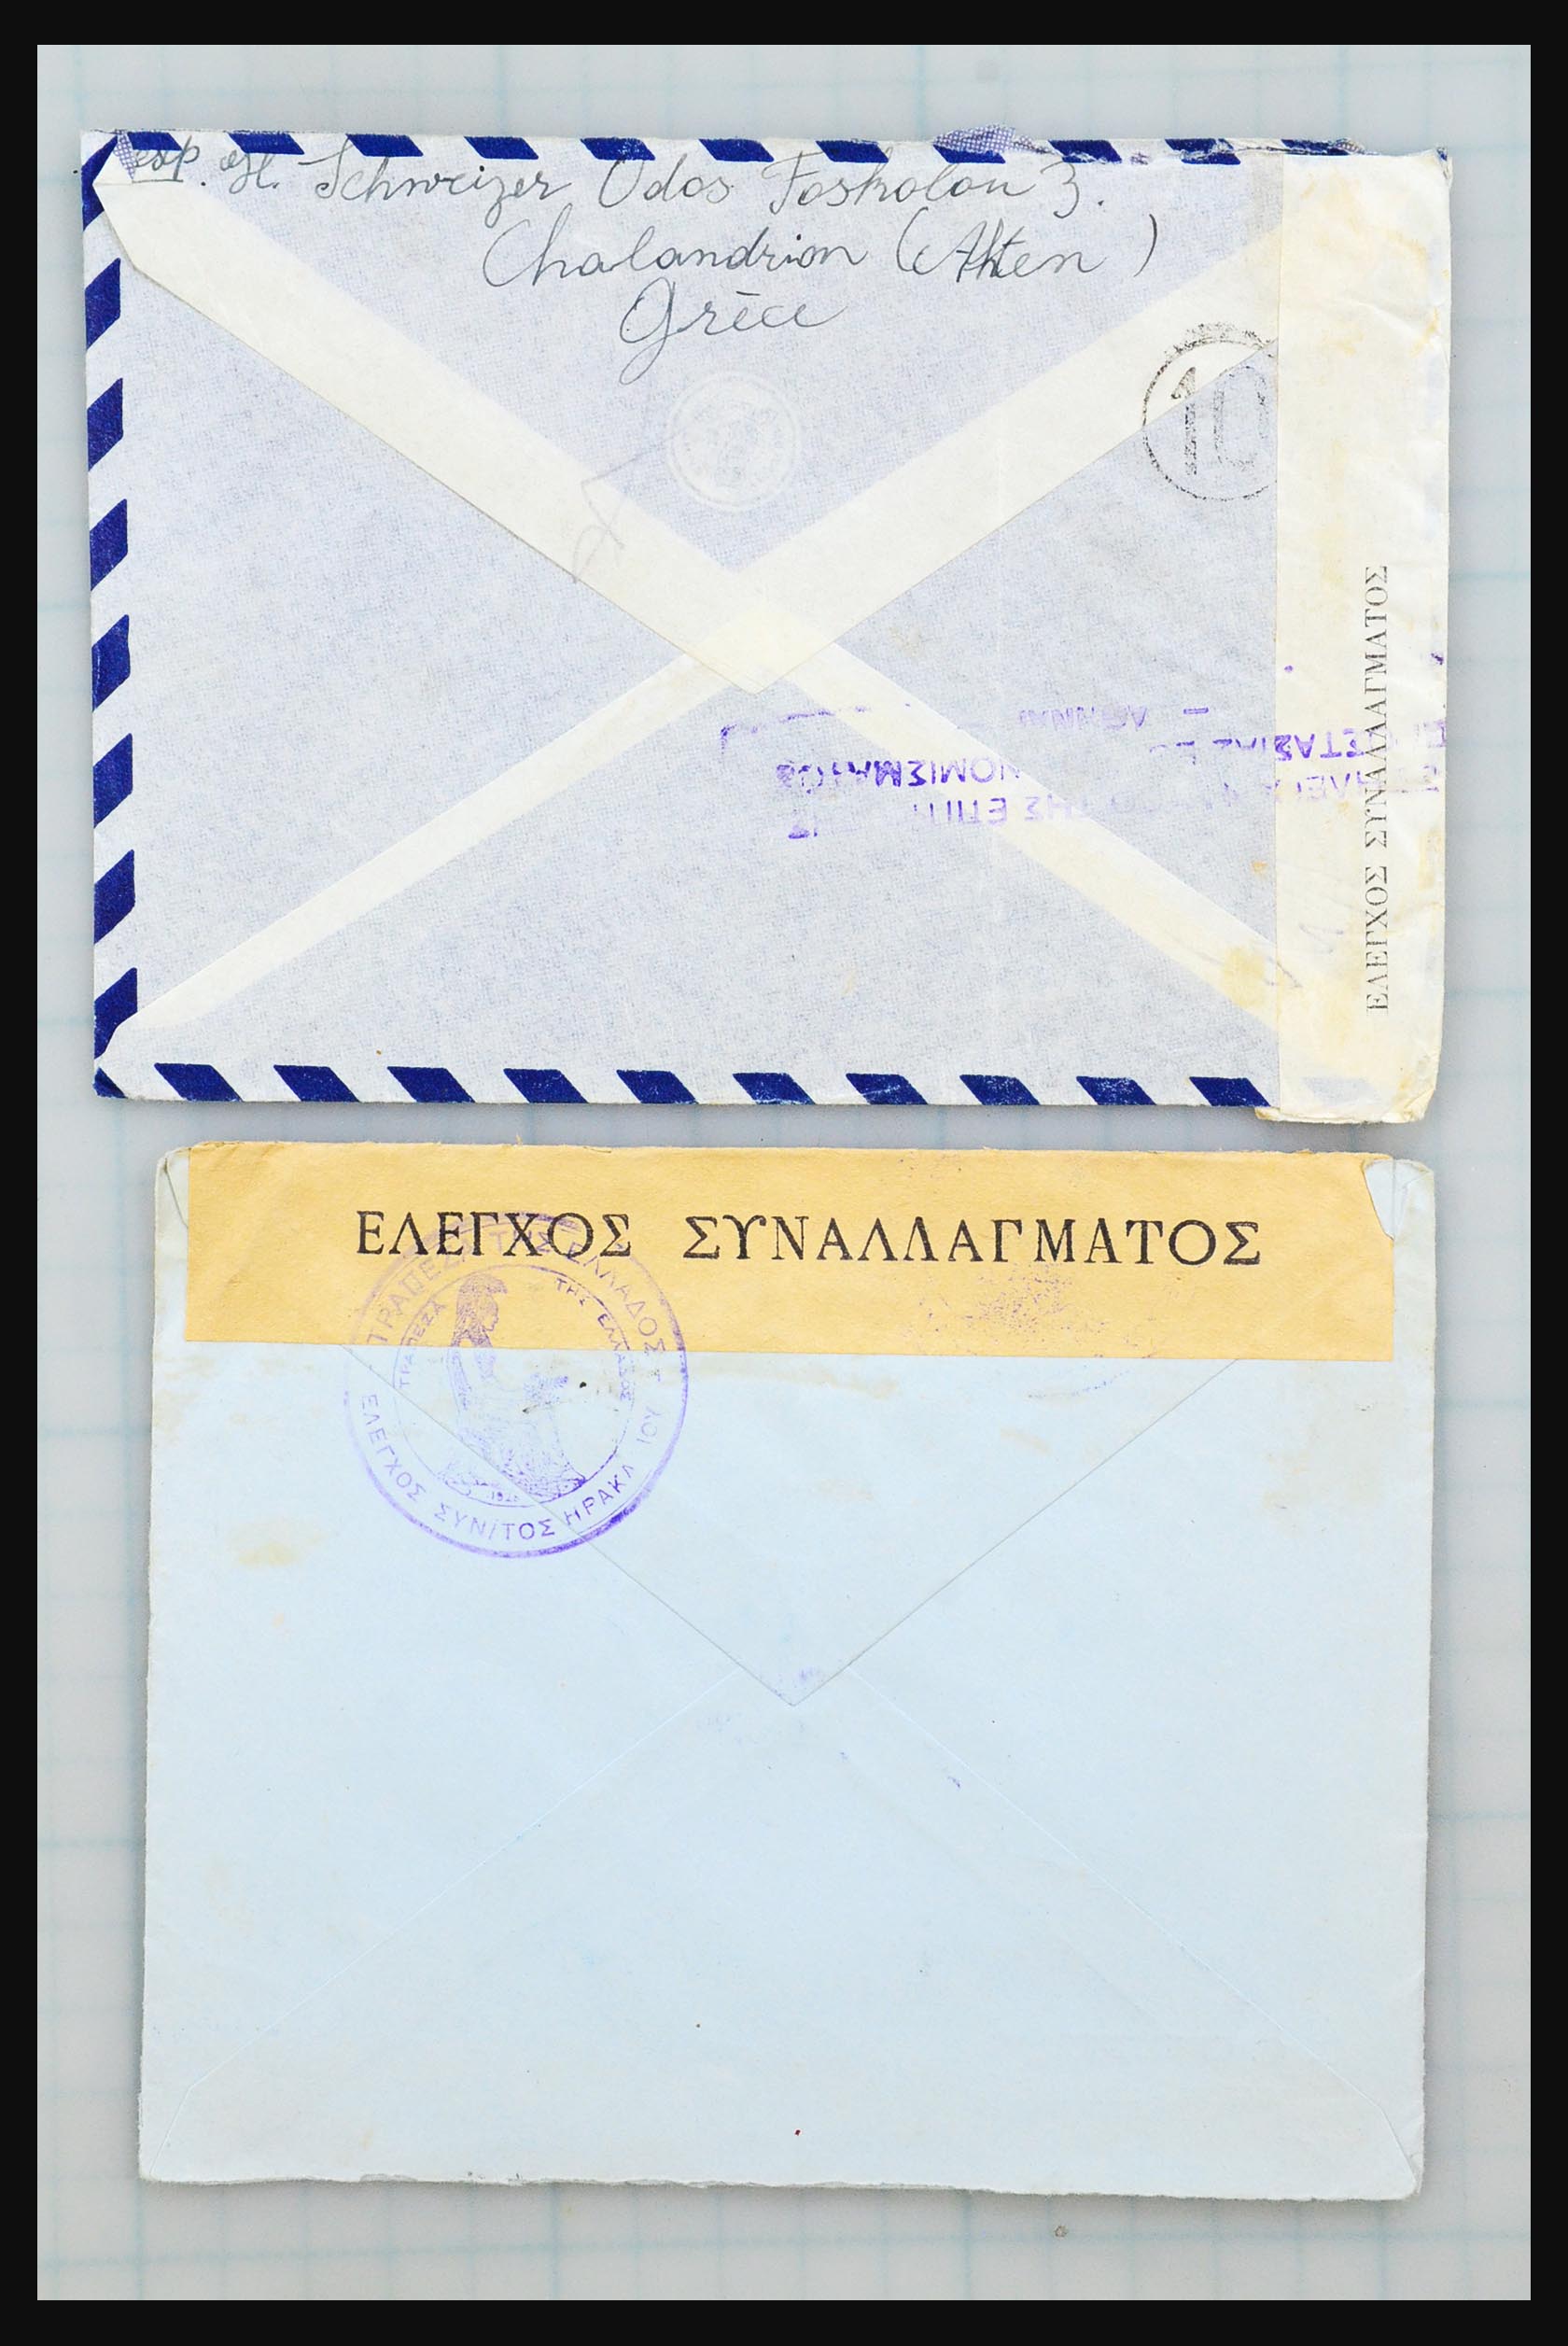 31358 035 - 31358 Portugal/Luxemburg/Greece covers 1880-1960.